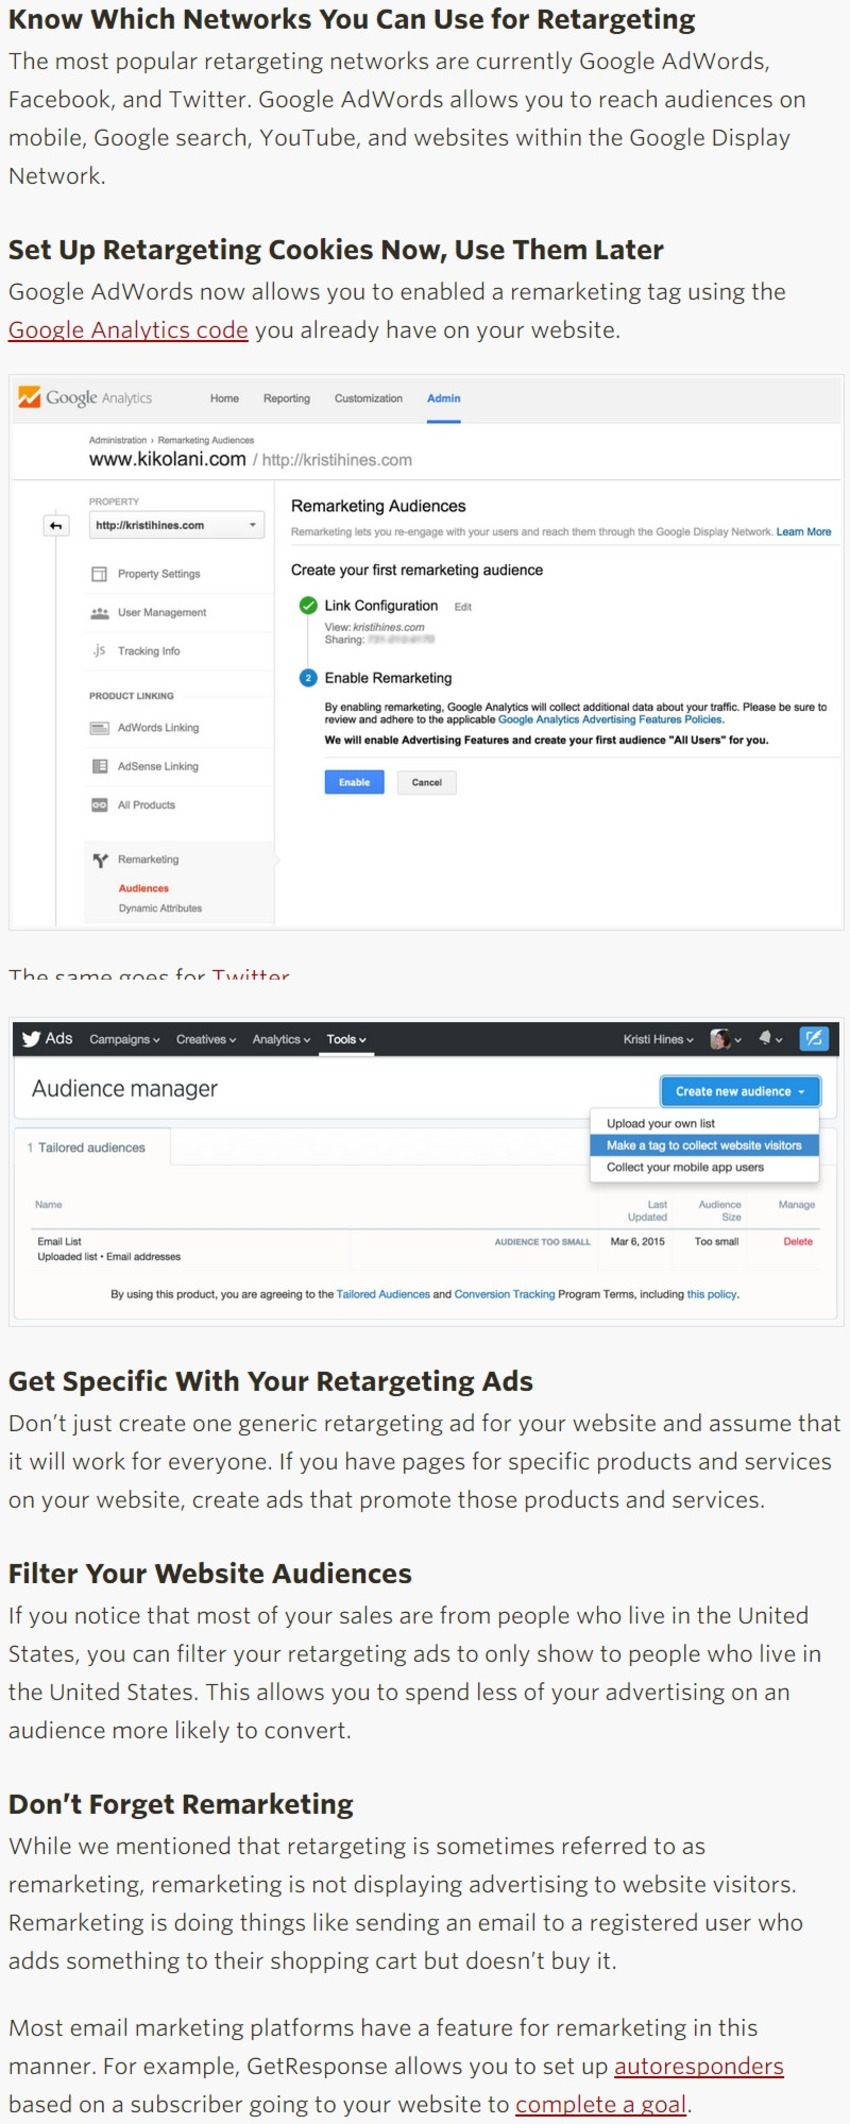 5 Retargeting and Remarketing Tips for Beginners - SumAll | The MarTech Digest | Scoop.it